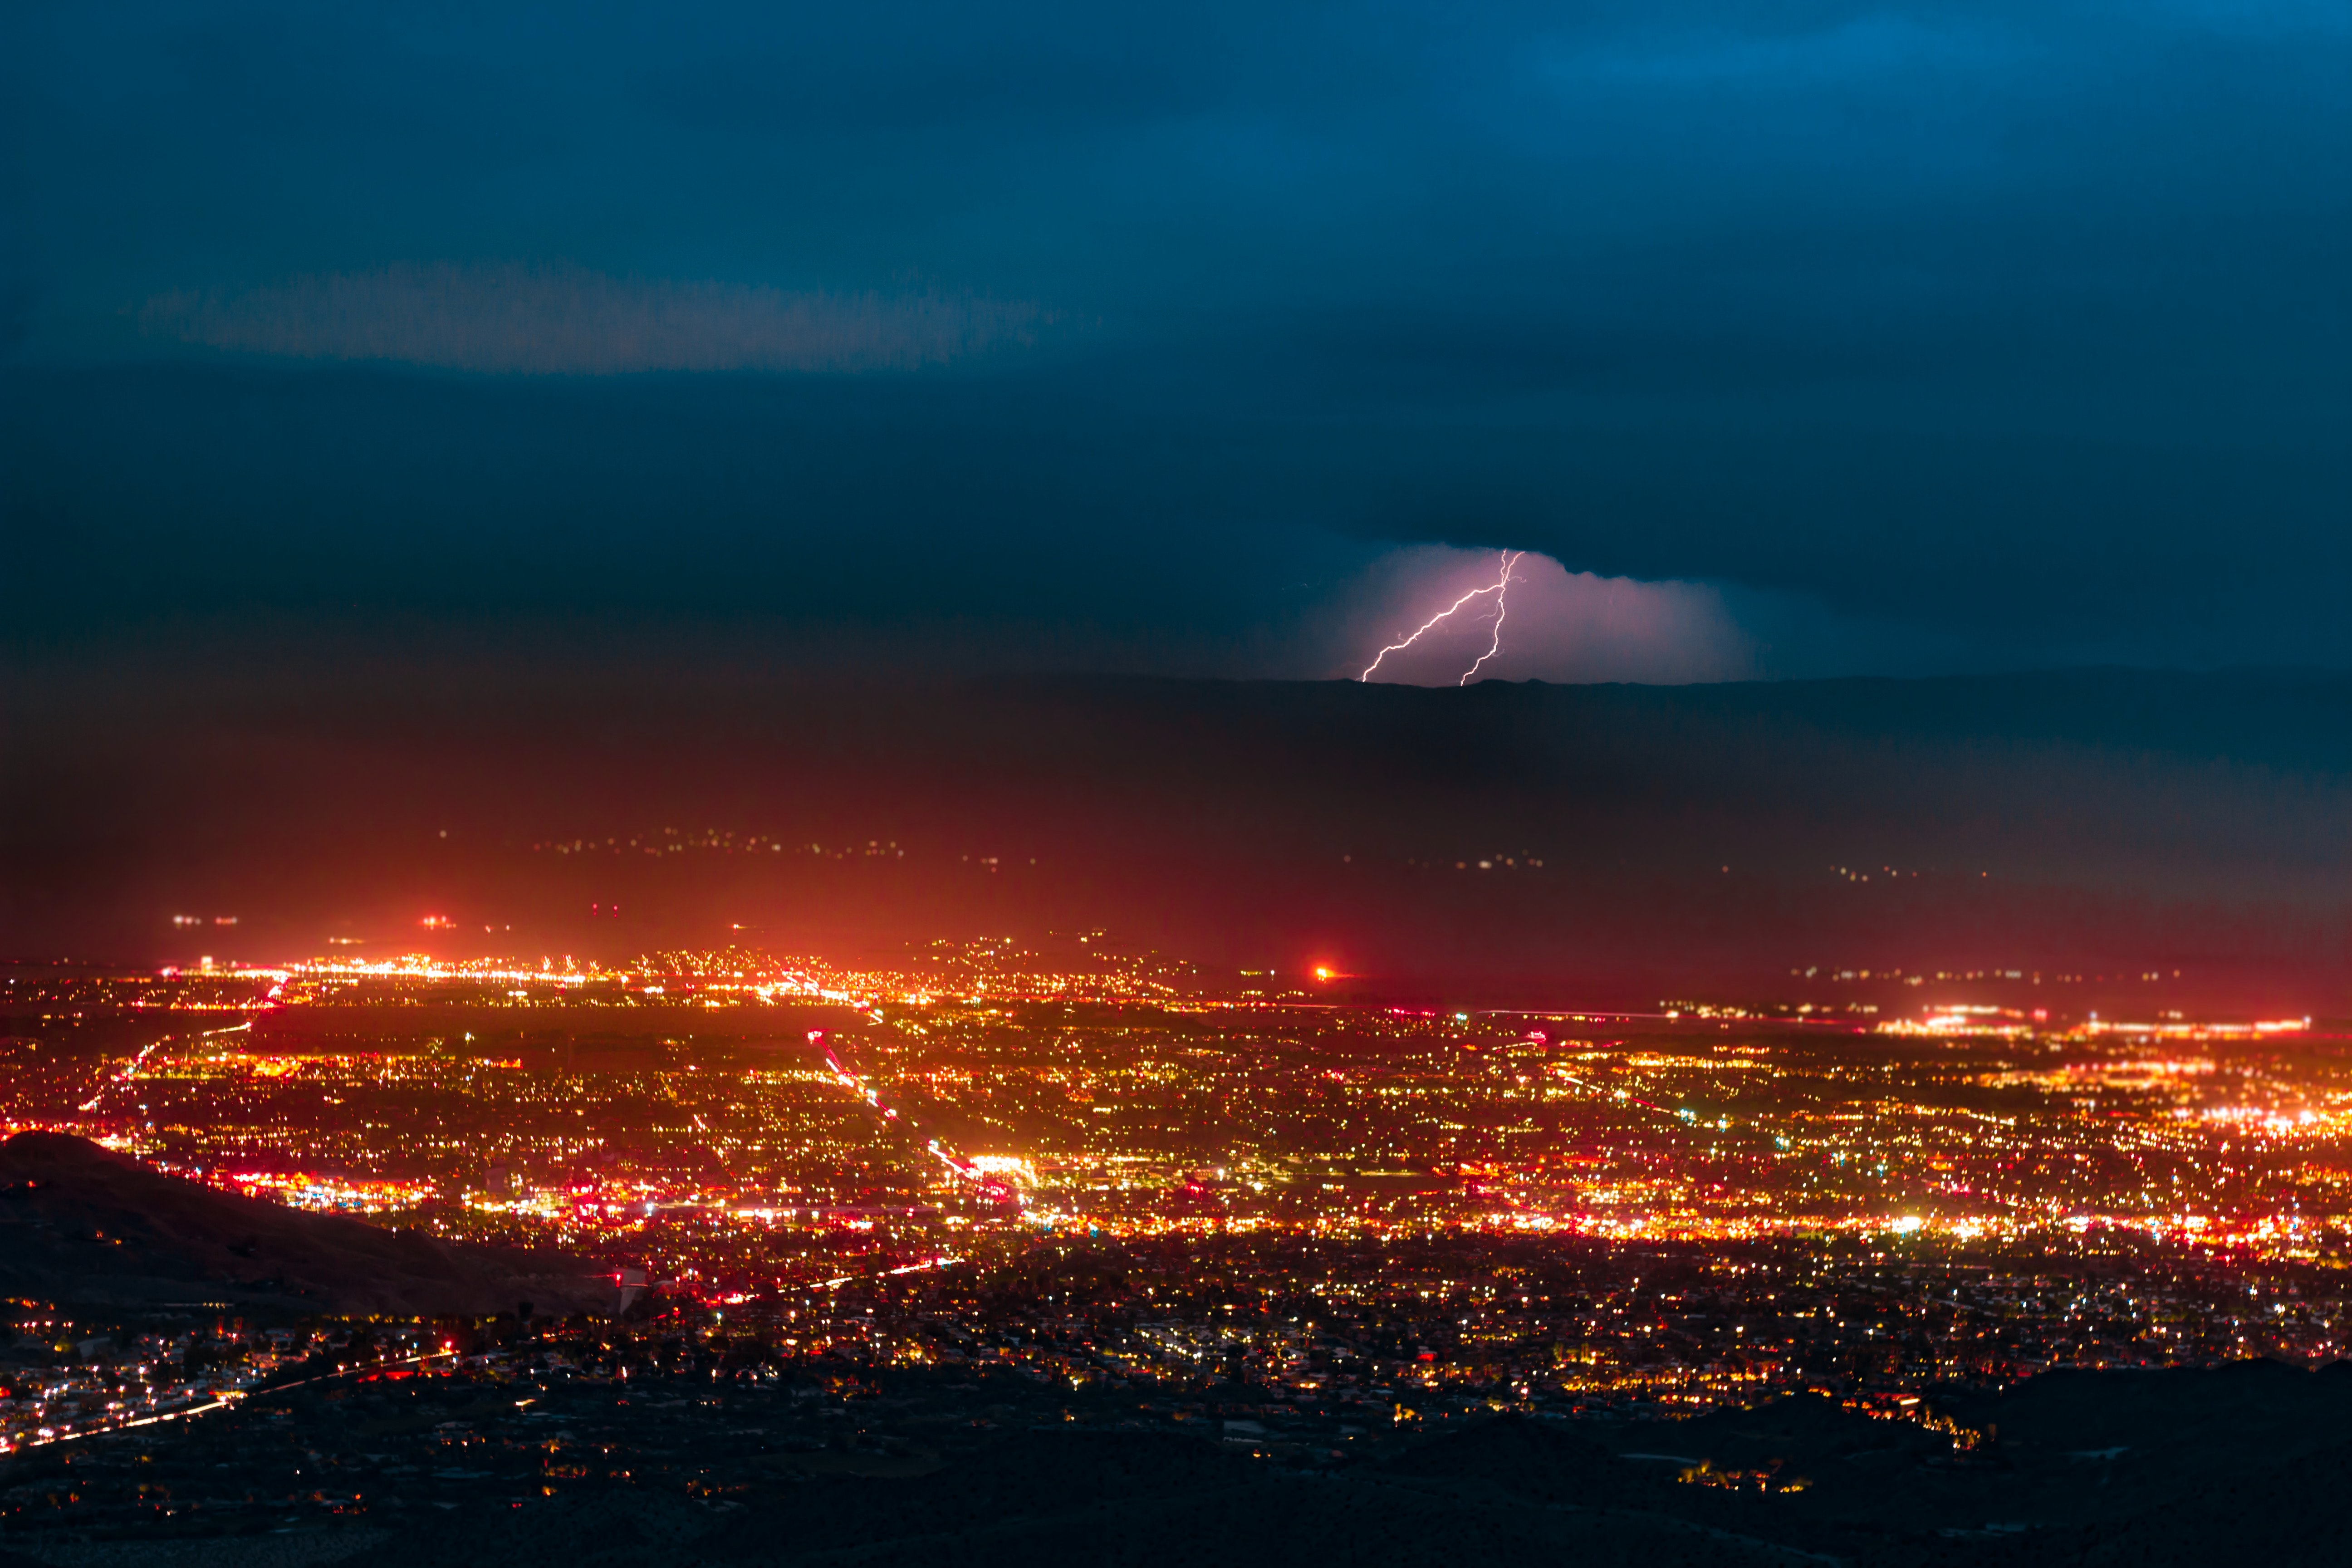 Aerial Photography of Urban City Overlooking Lightning during Nighttime, Backlit, Lightning, Travel, Storm, HQ Photo